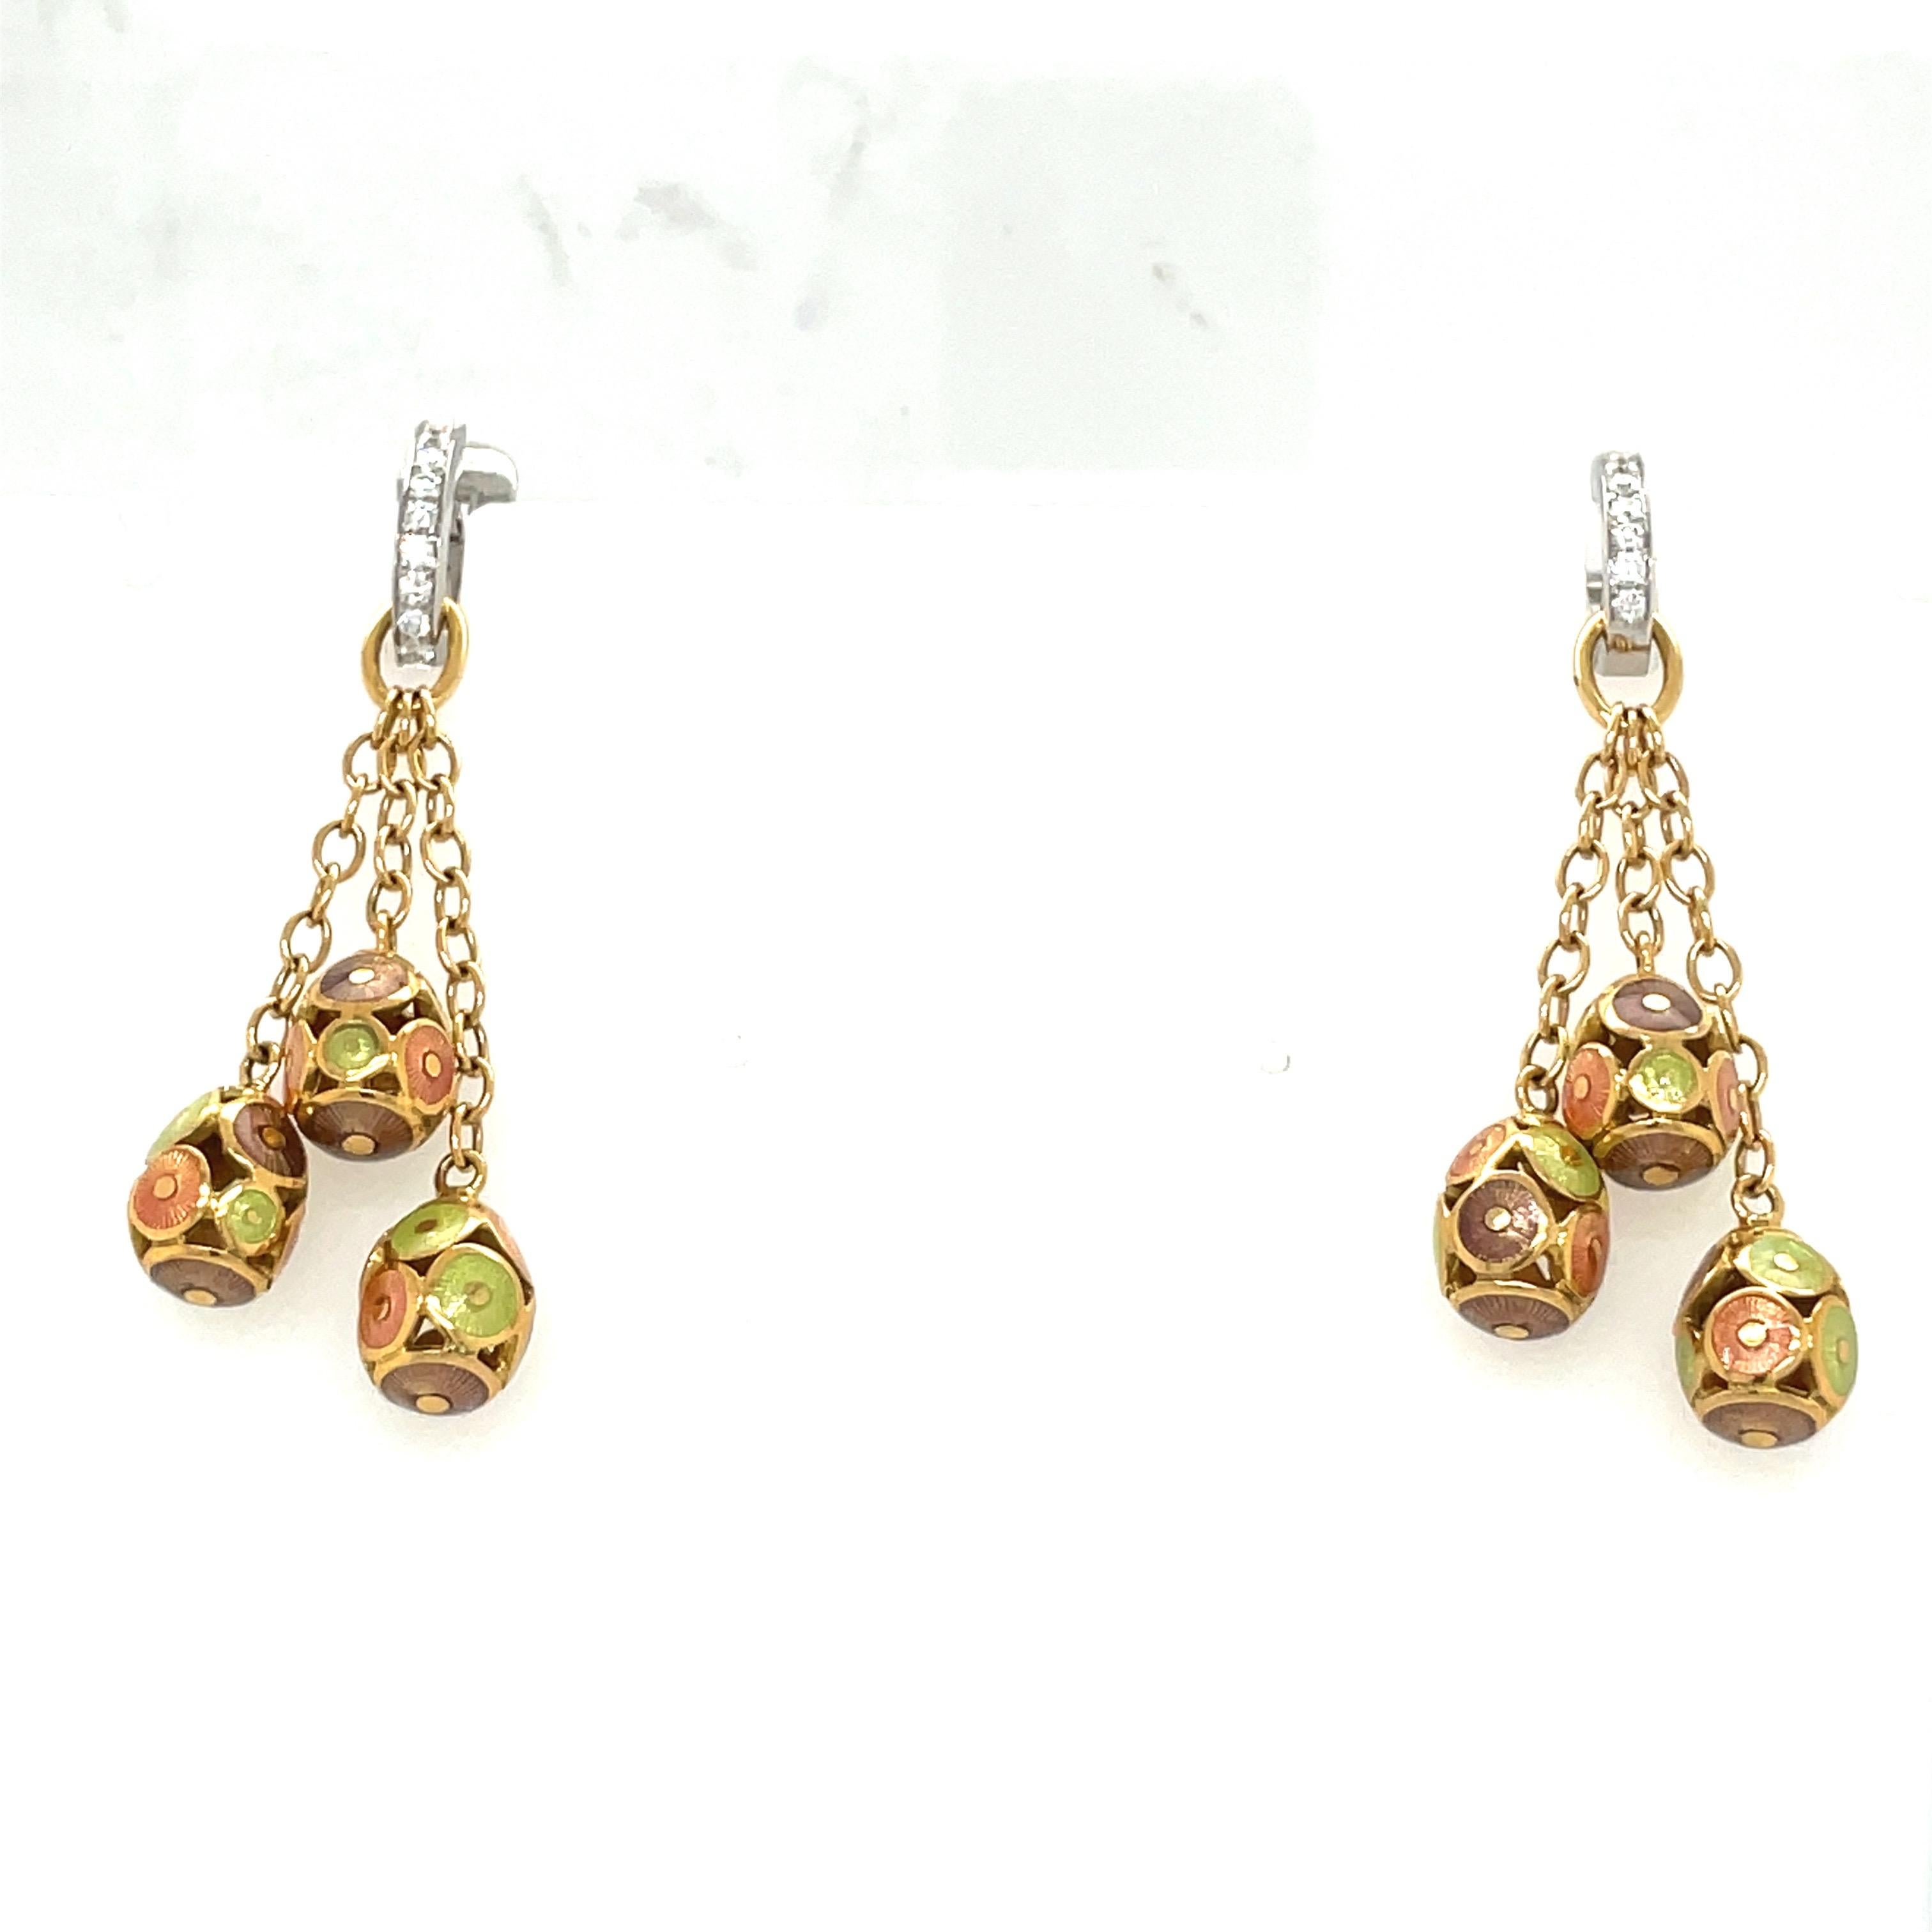 These modern 18 karat yellow Faberge earrings were crafted by Victor Mayer. Each earring features 3 hanging eggs, each with a circular pattern in peach, taupe,and mint green guilloche enamel. The enamel eggs are hanging from an 18 karat yellow gold